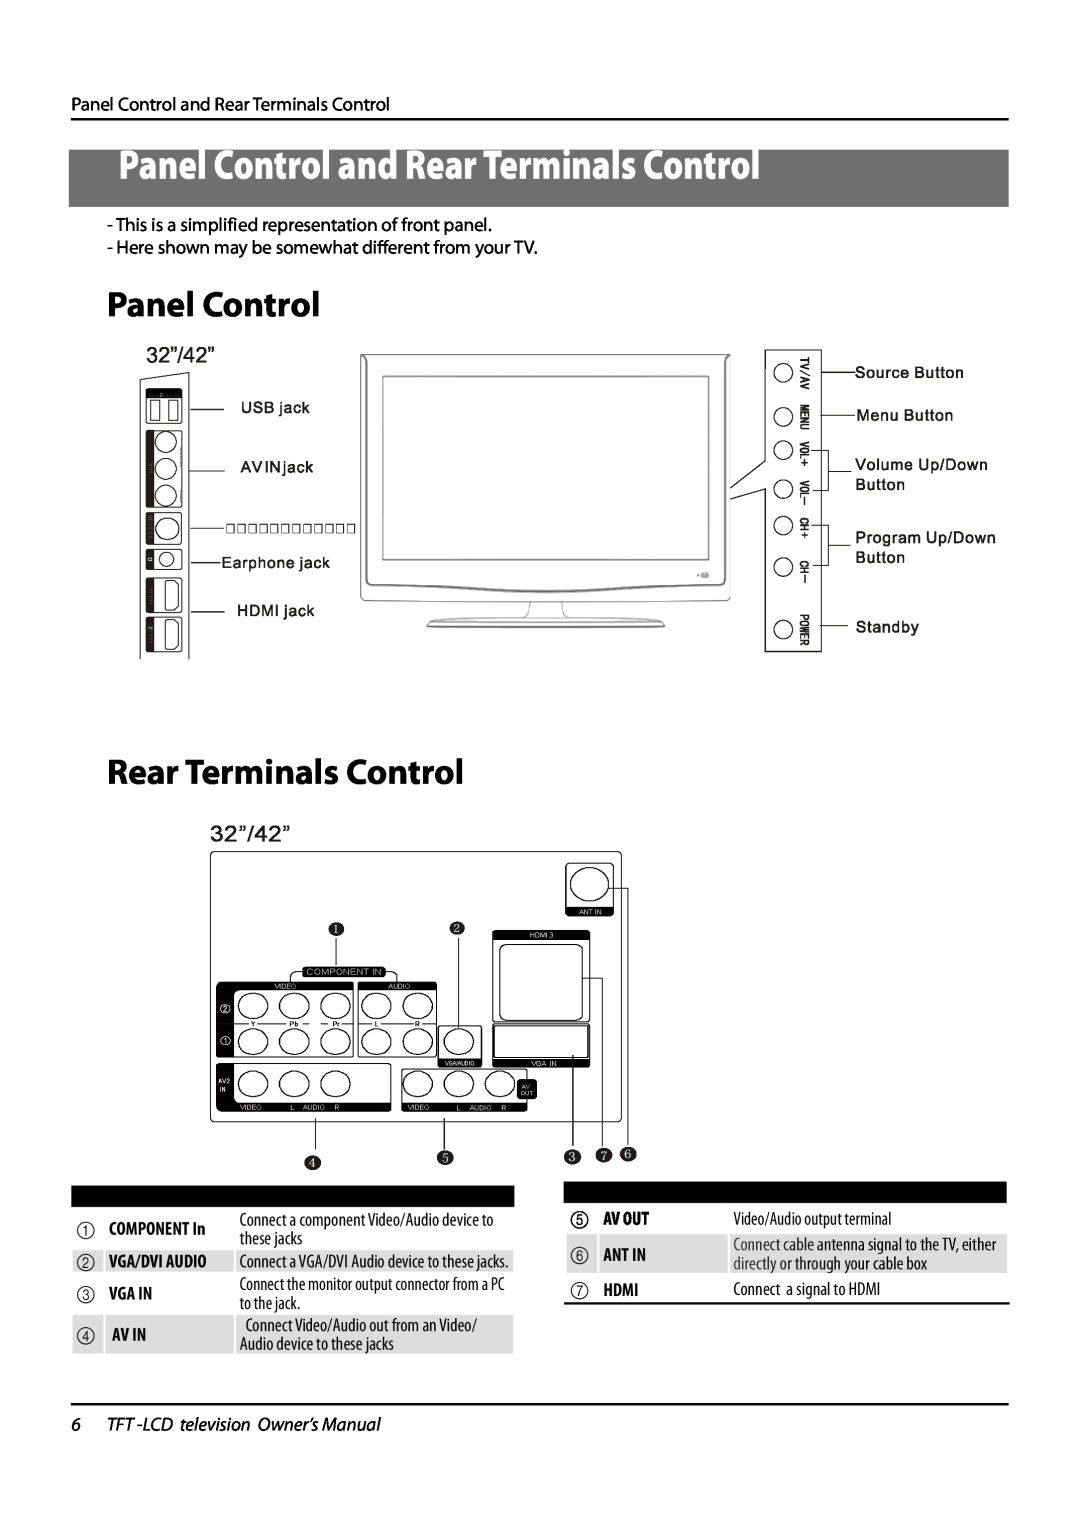 Haier L32K3 owner manual Panel Control and Rear Terminals Control, 32”/42”, TFT -LCD television Owner’s Manual 